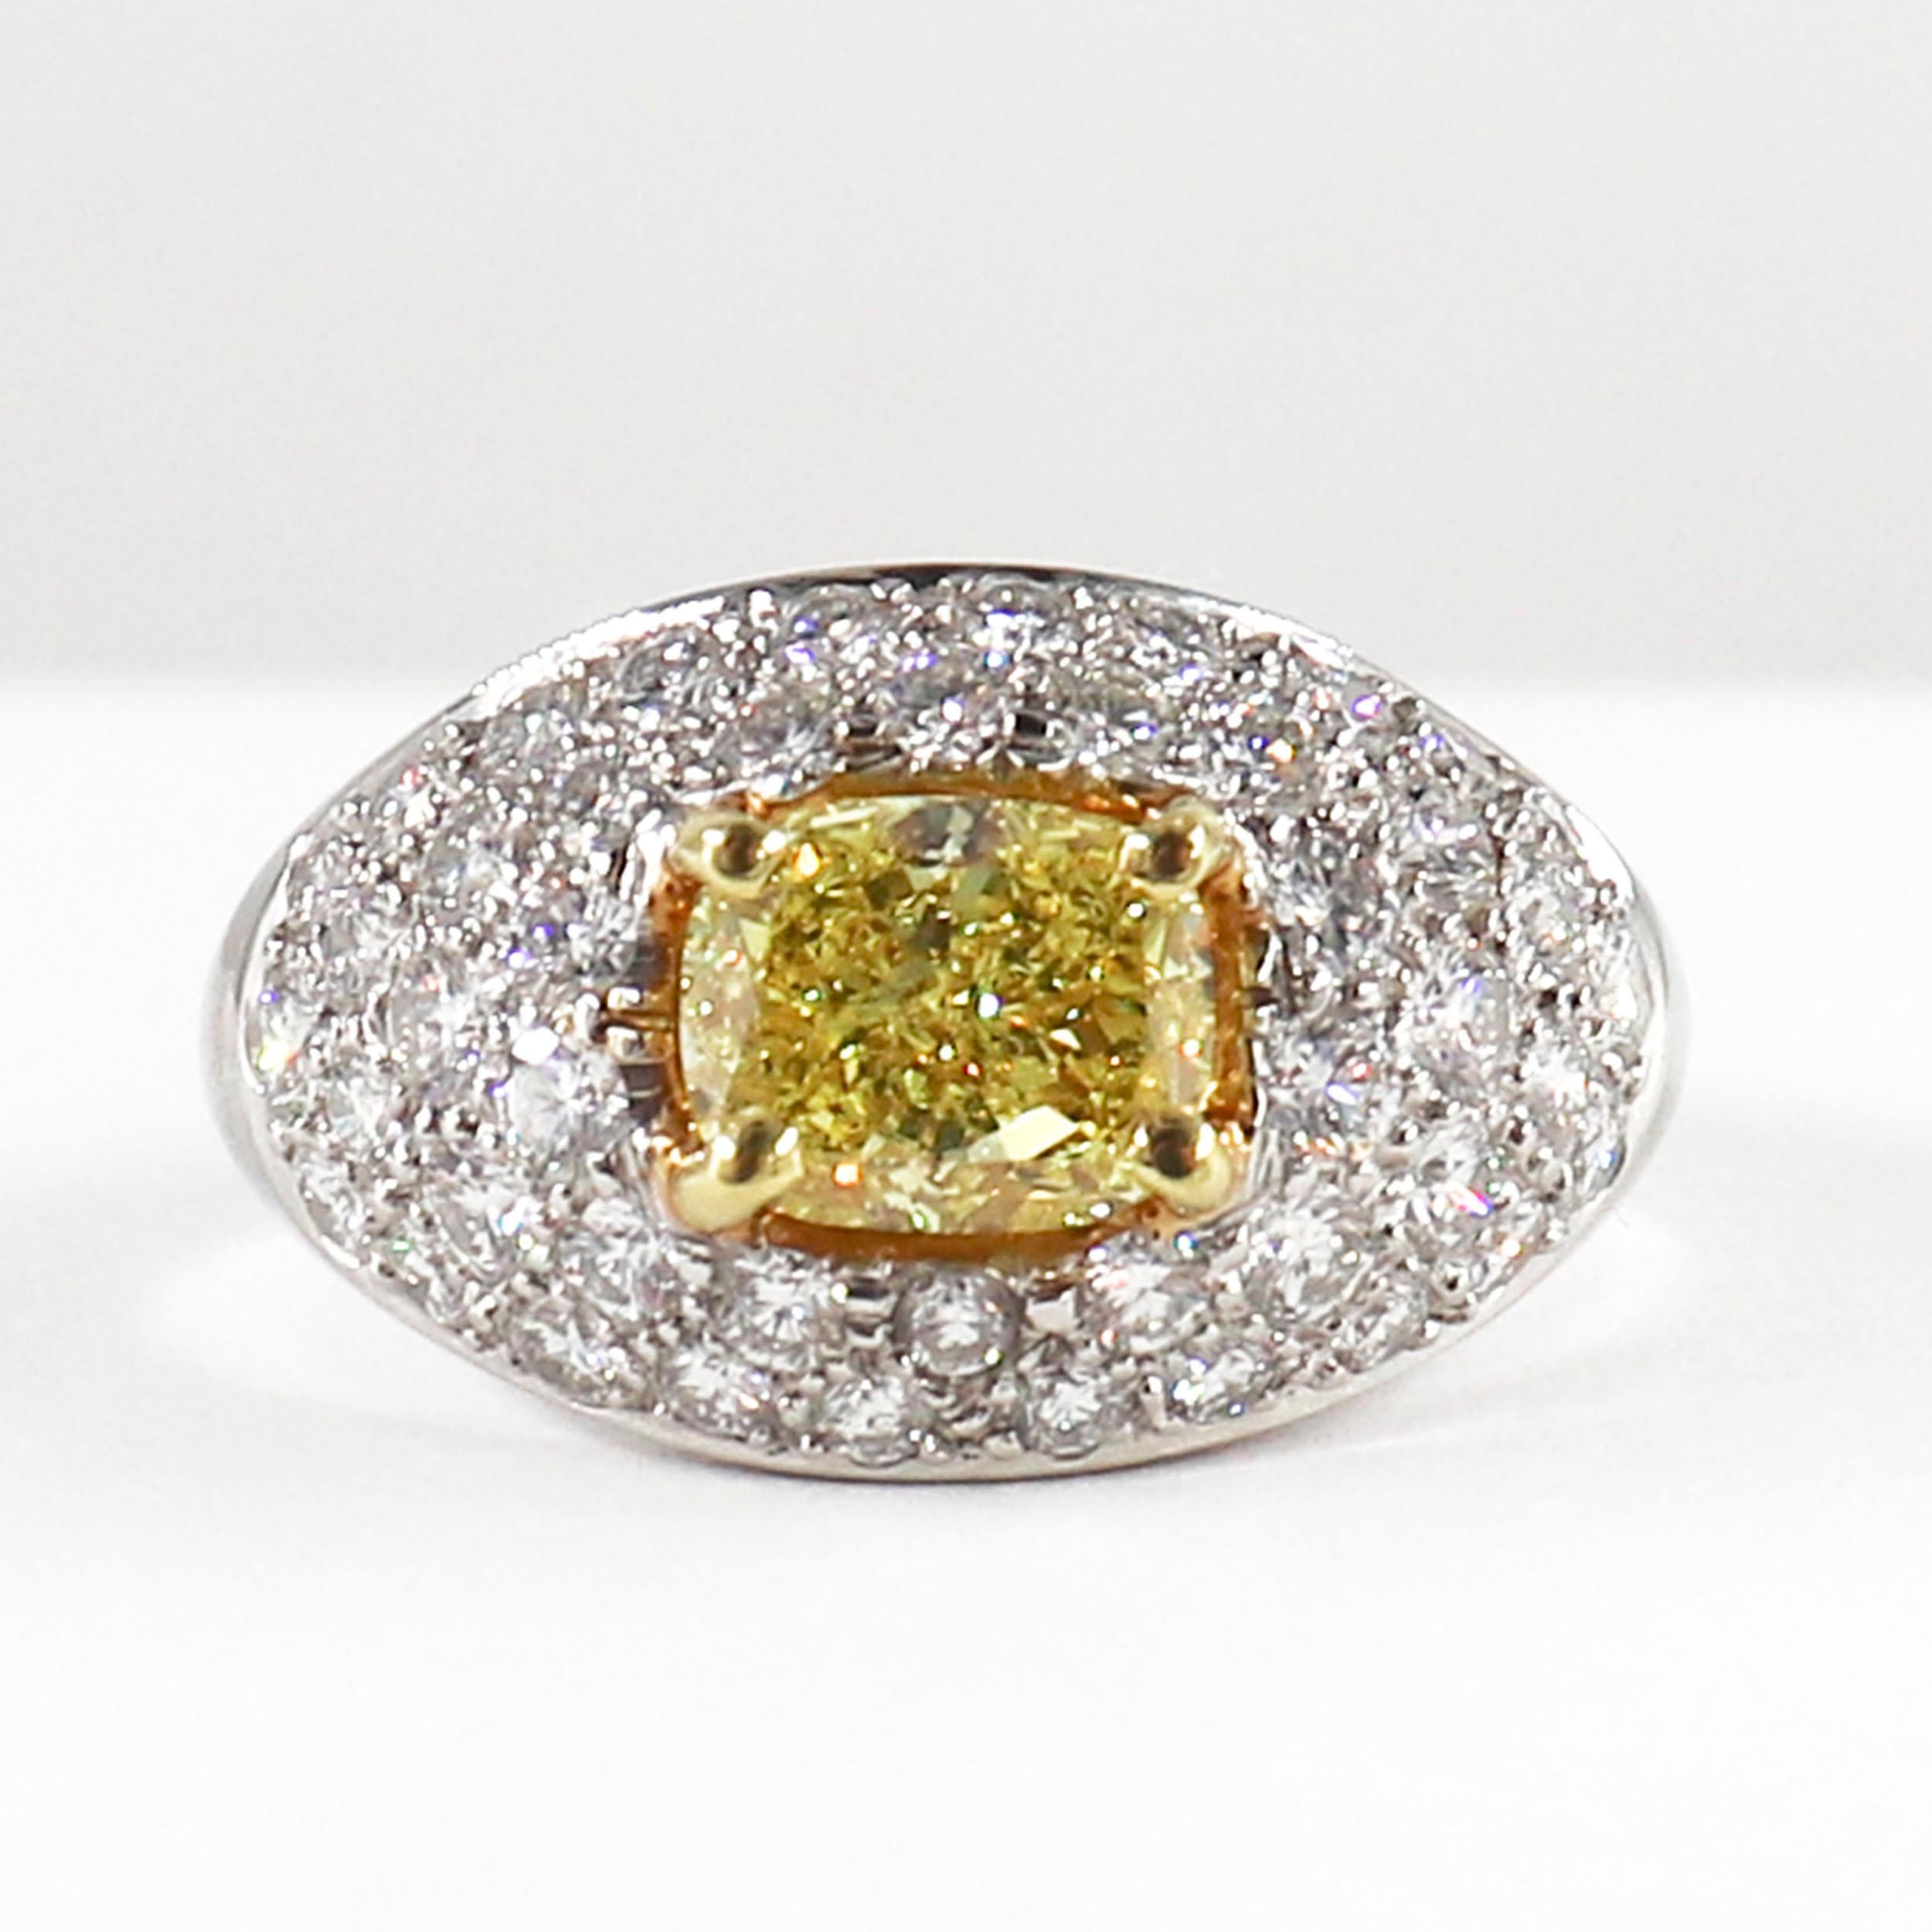 J. Birnbach 1.53 Carat Fancy Intense Yellow Cushion Diamond Pave Ring In New Condition For Sale In New York, NY